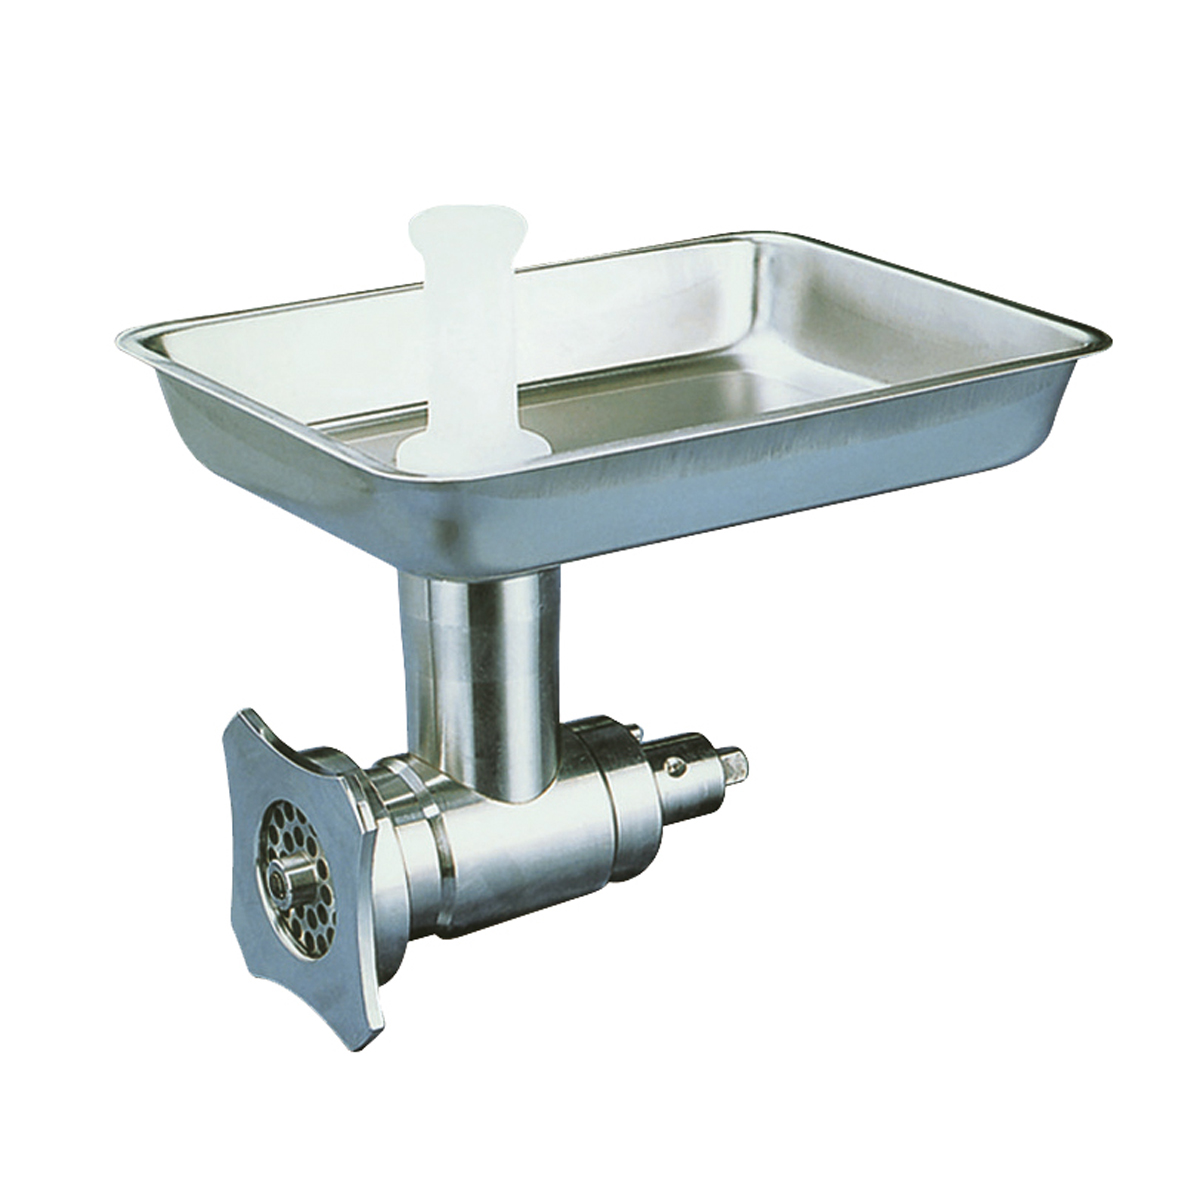 Skyfood MGA12 # 12 Meat Grinder Attachment